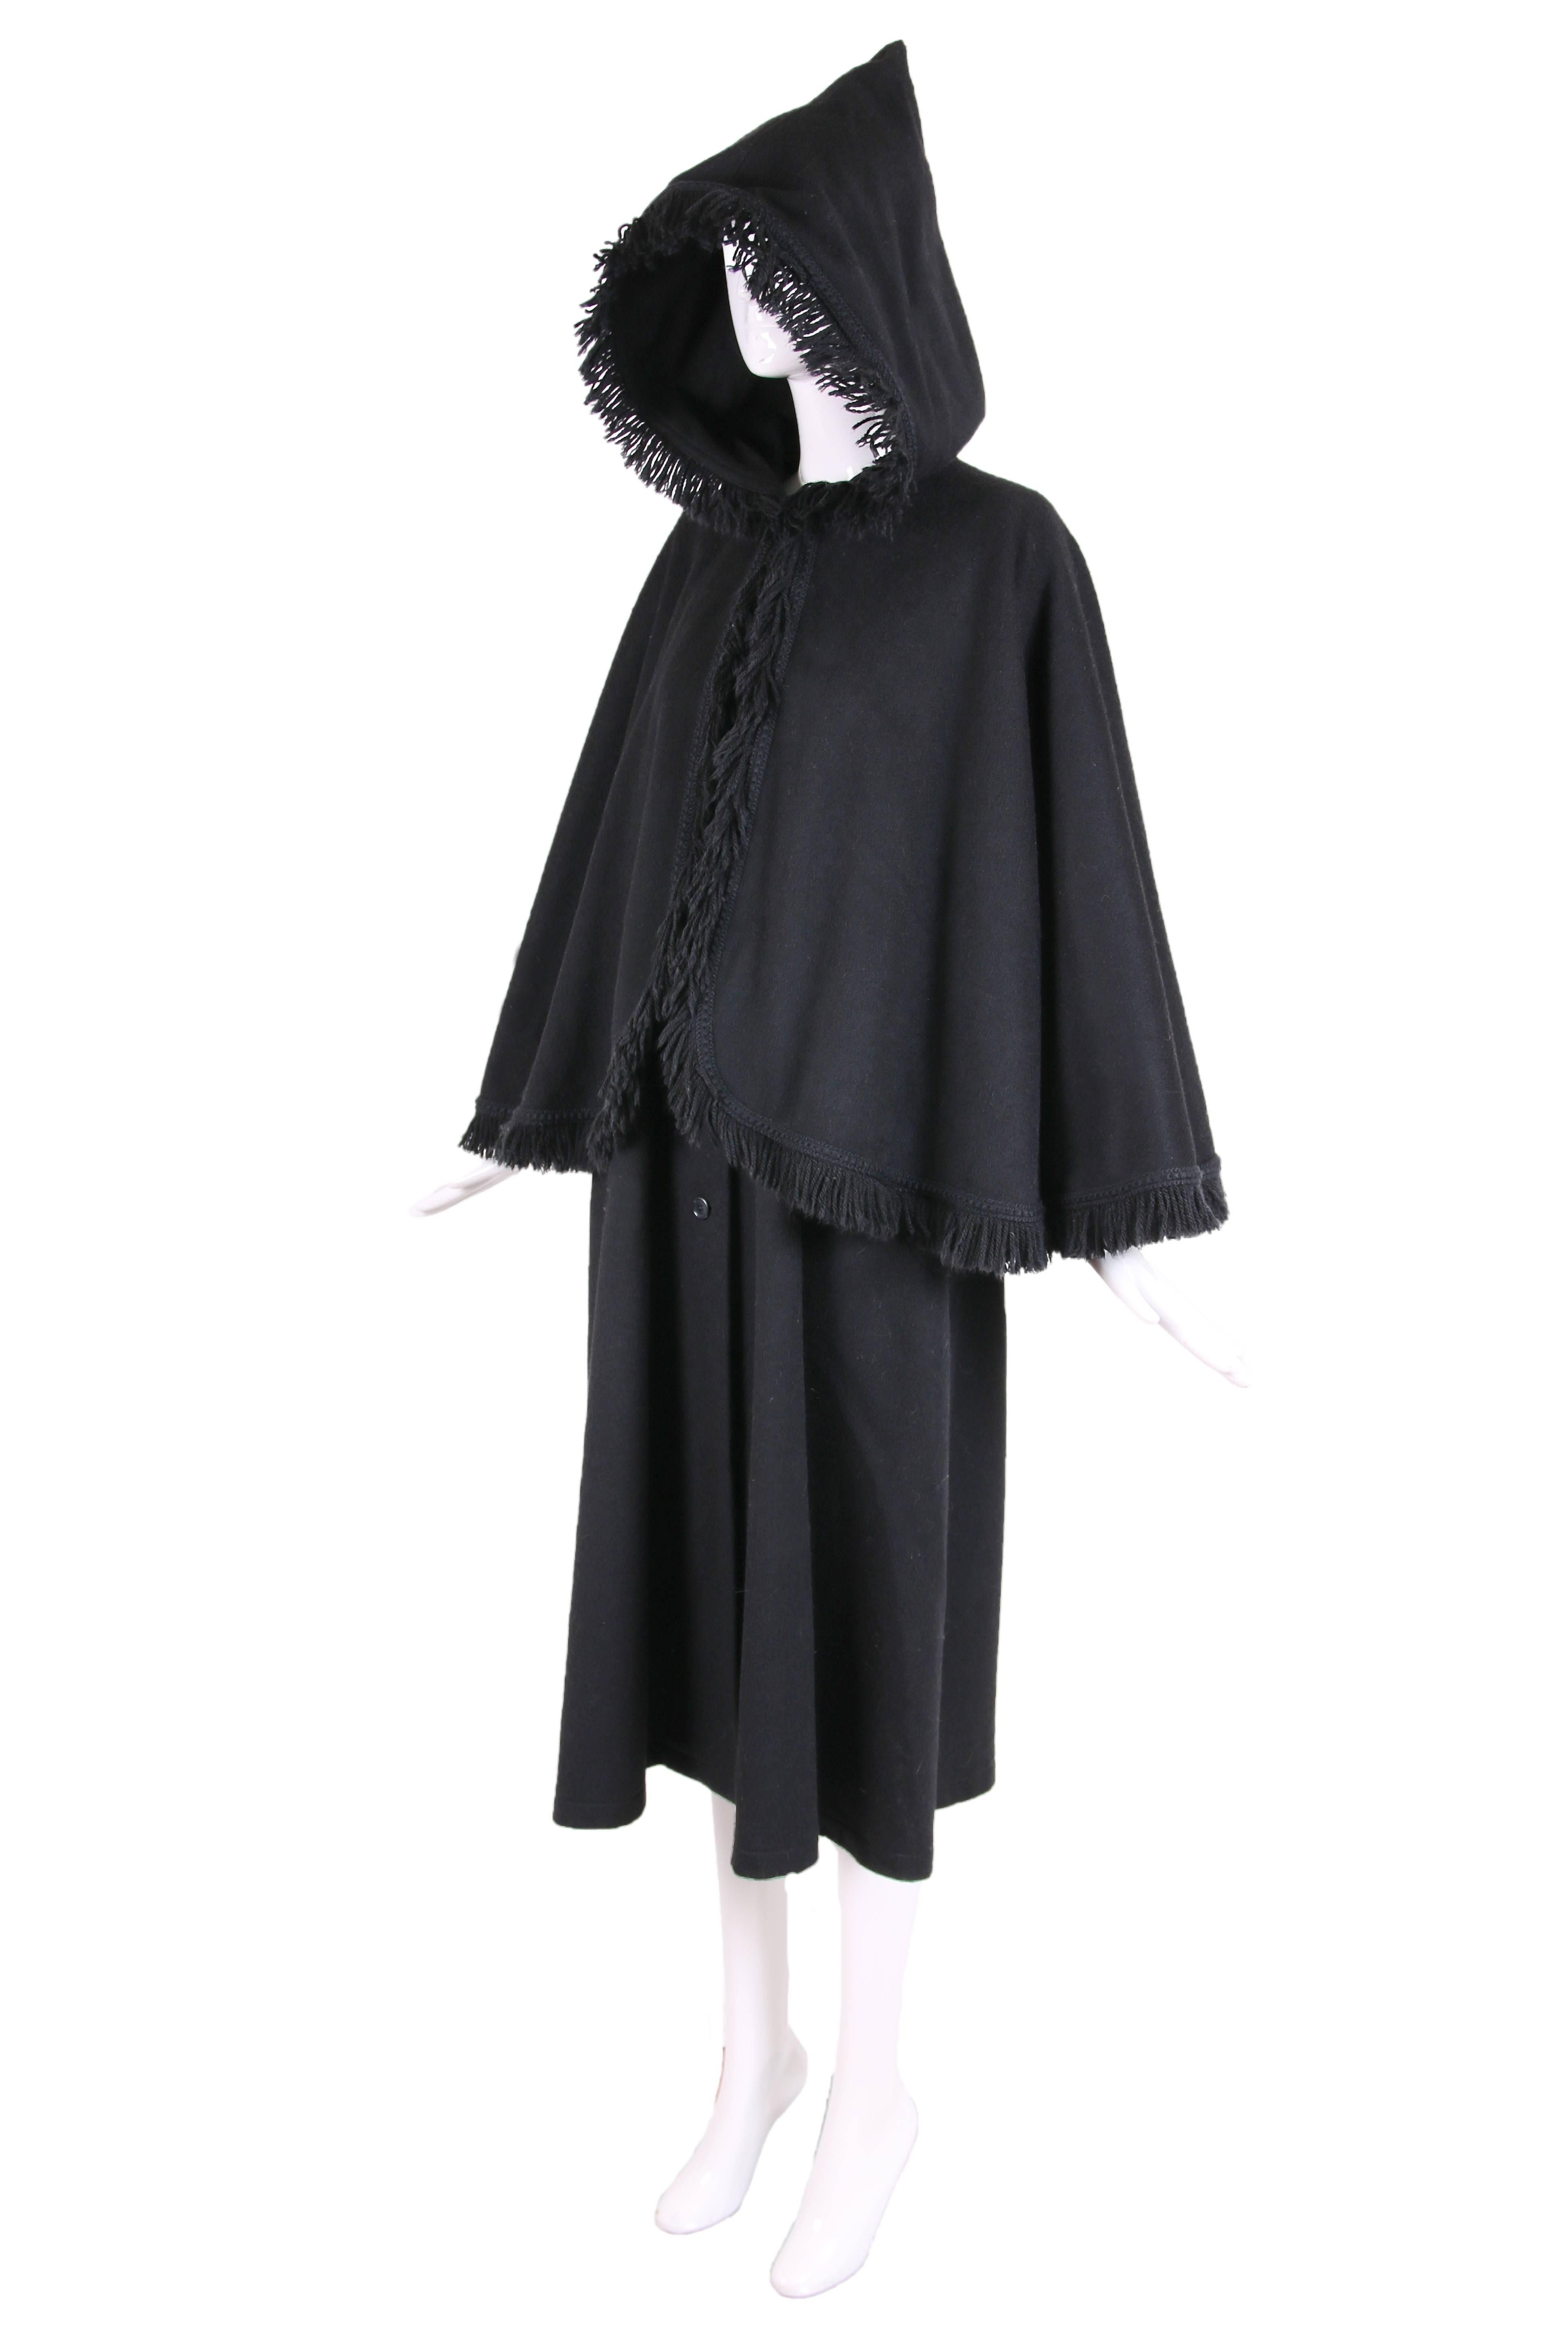 1970's Yves Saint Laurent black wool cape coat with hood and wool fringe trim. Coat underneath cape has a swing silhouette, button closure down center front and hidden side pockets. In excellent condition with a tiny hole in the interior fabric